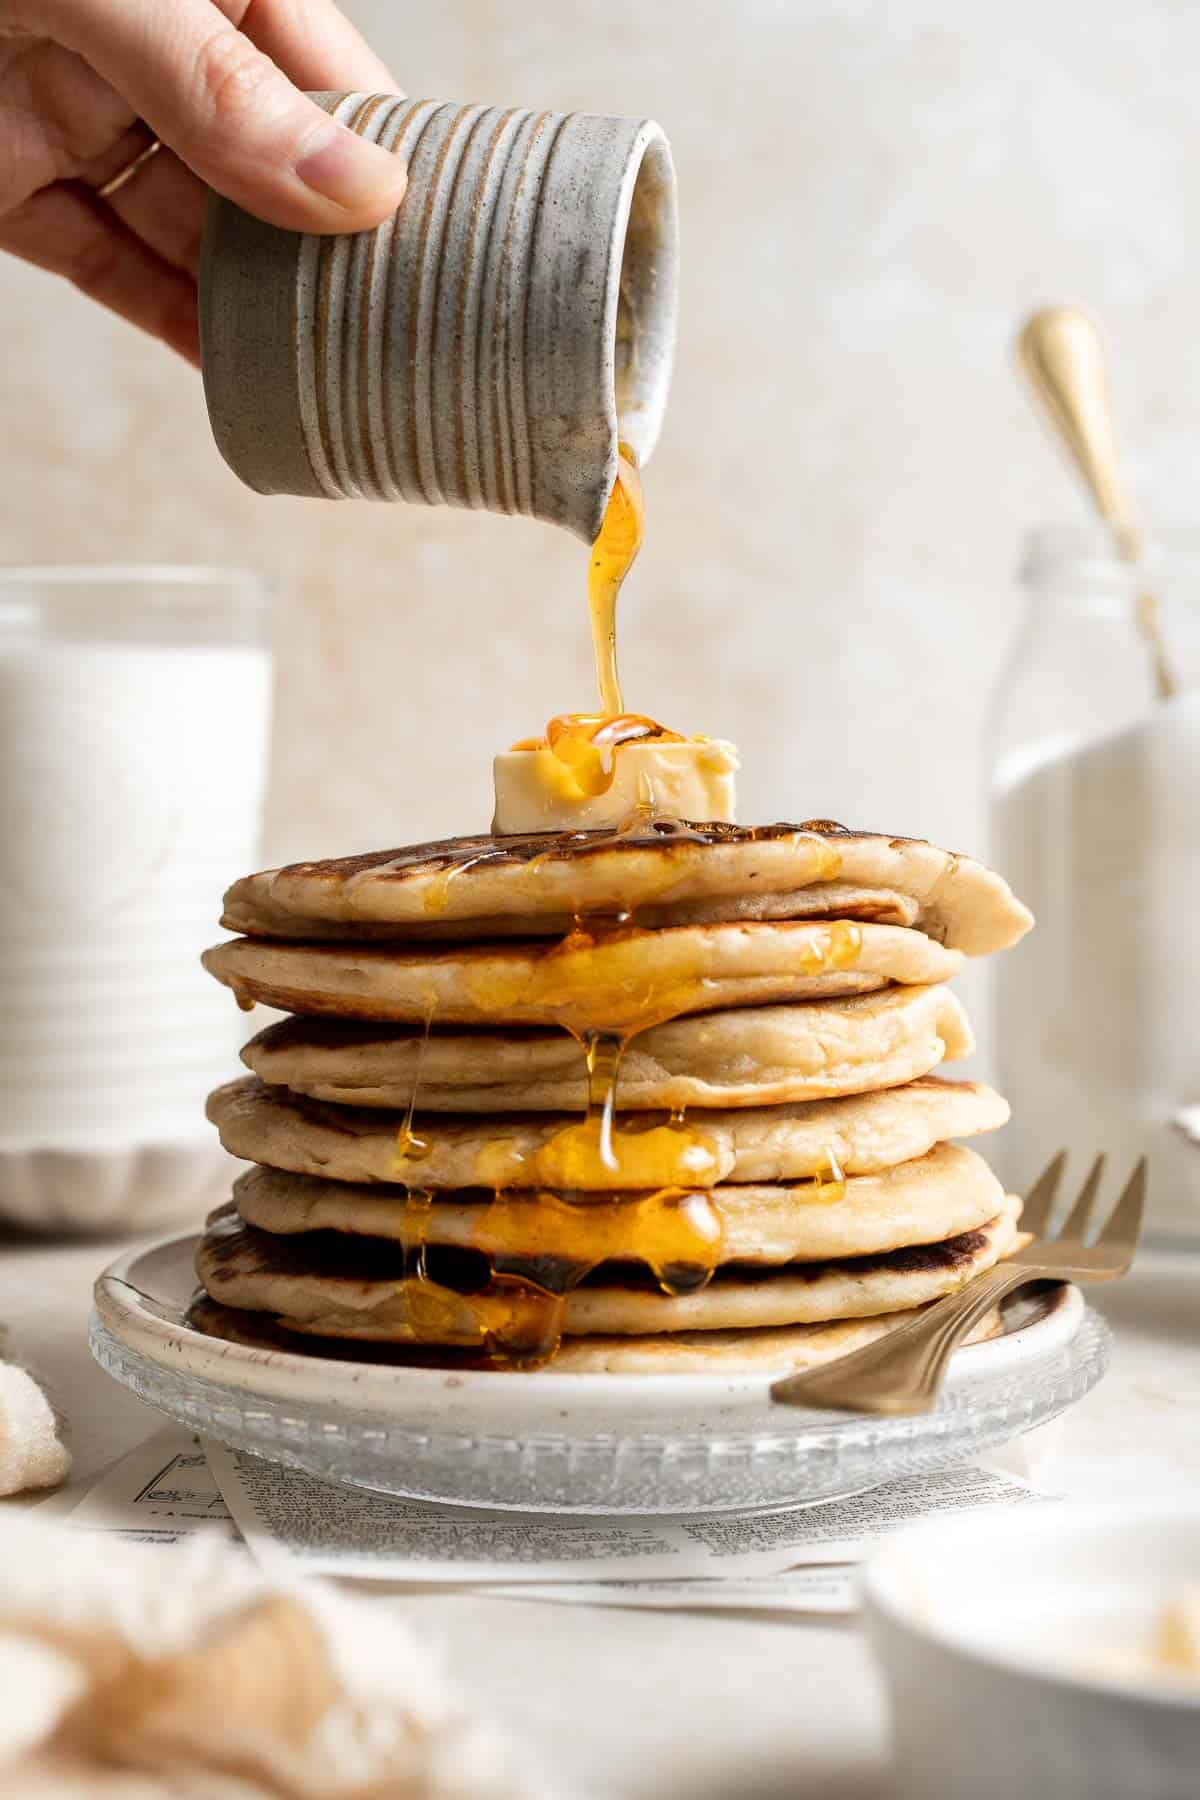 The Best Old Fashioned Pancakes are soft, tender, fluffy, and so easy to make. Ready in 15 minutes and perfect for lazy Sunday mornings! | aheadofthyme.com